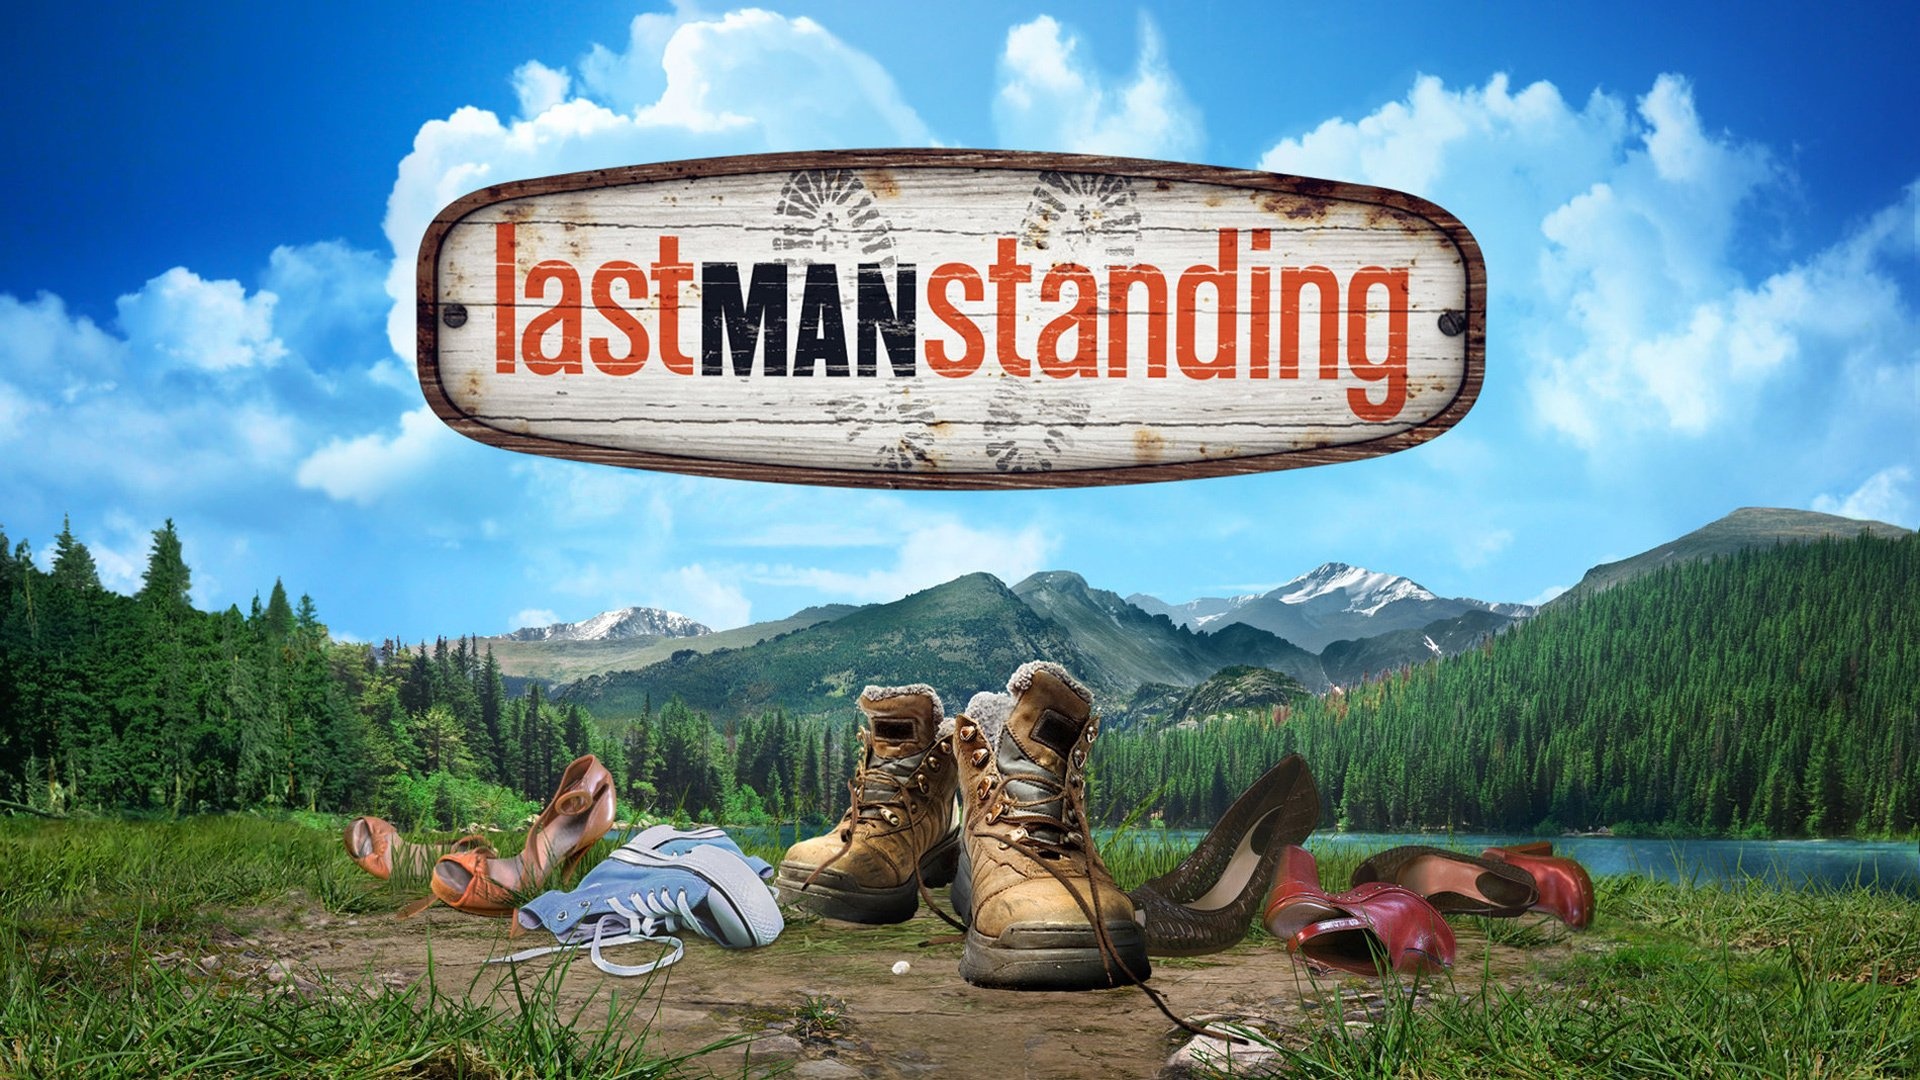 Last Man Standing TV show wallpapers, Variety of styles, High-resolution images, 1920x1080 Full HD Desktop